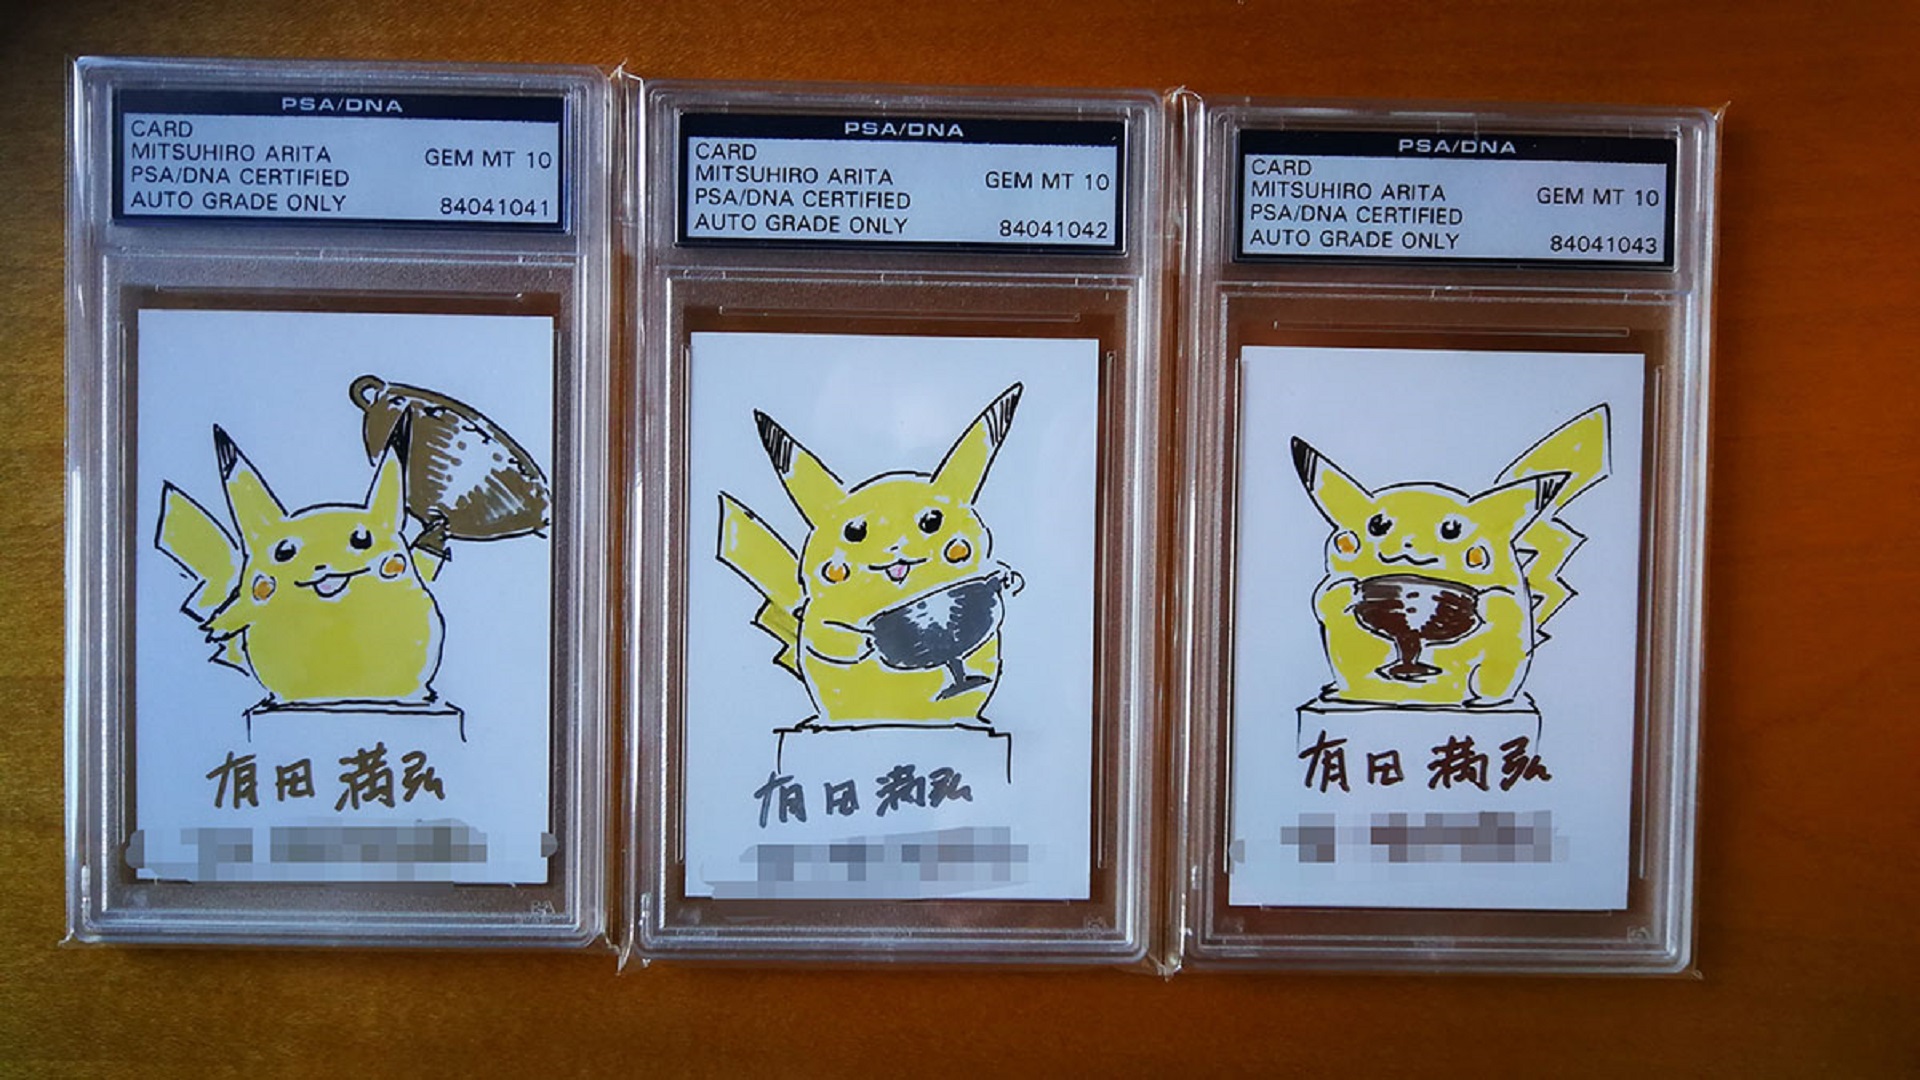 https://www.theloadout.com/wp-content/sites/theloadout/2020/12/pokemon-tcg-most-expensive-card-Mitsuhiro-Arita.jpg